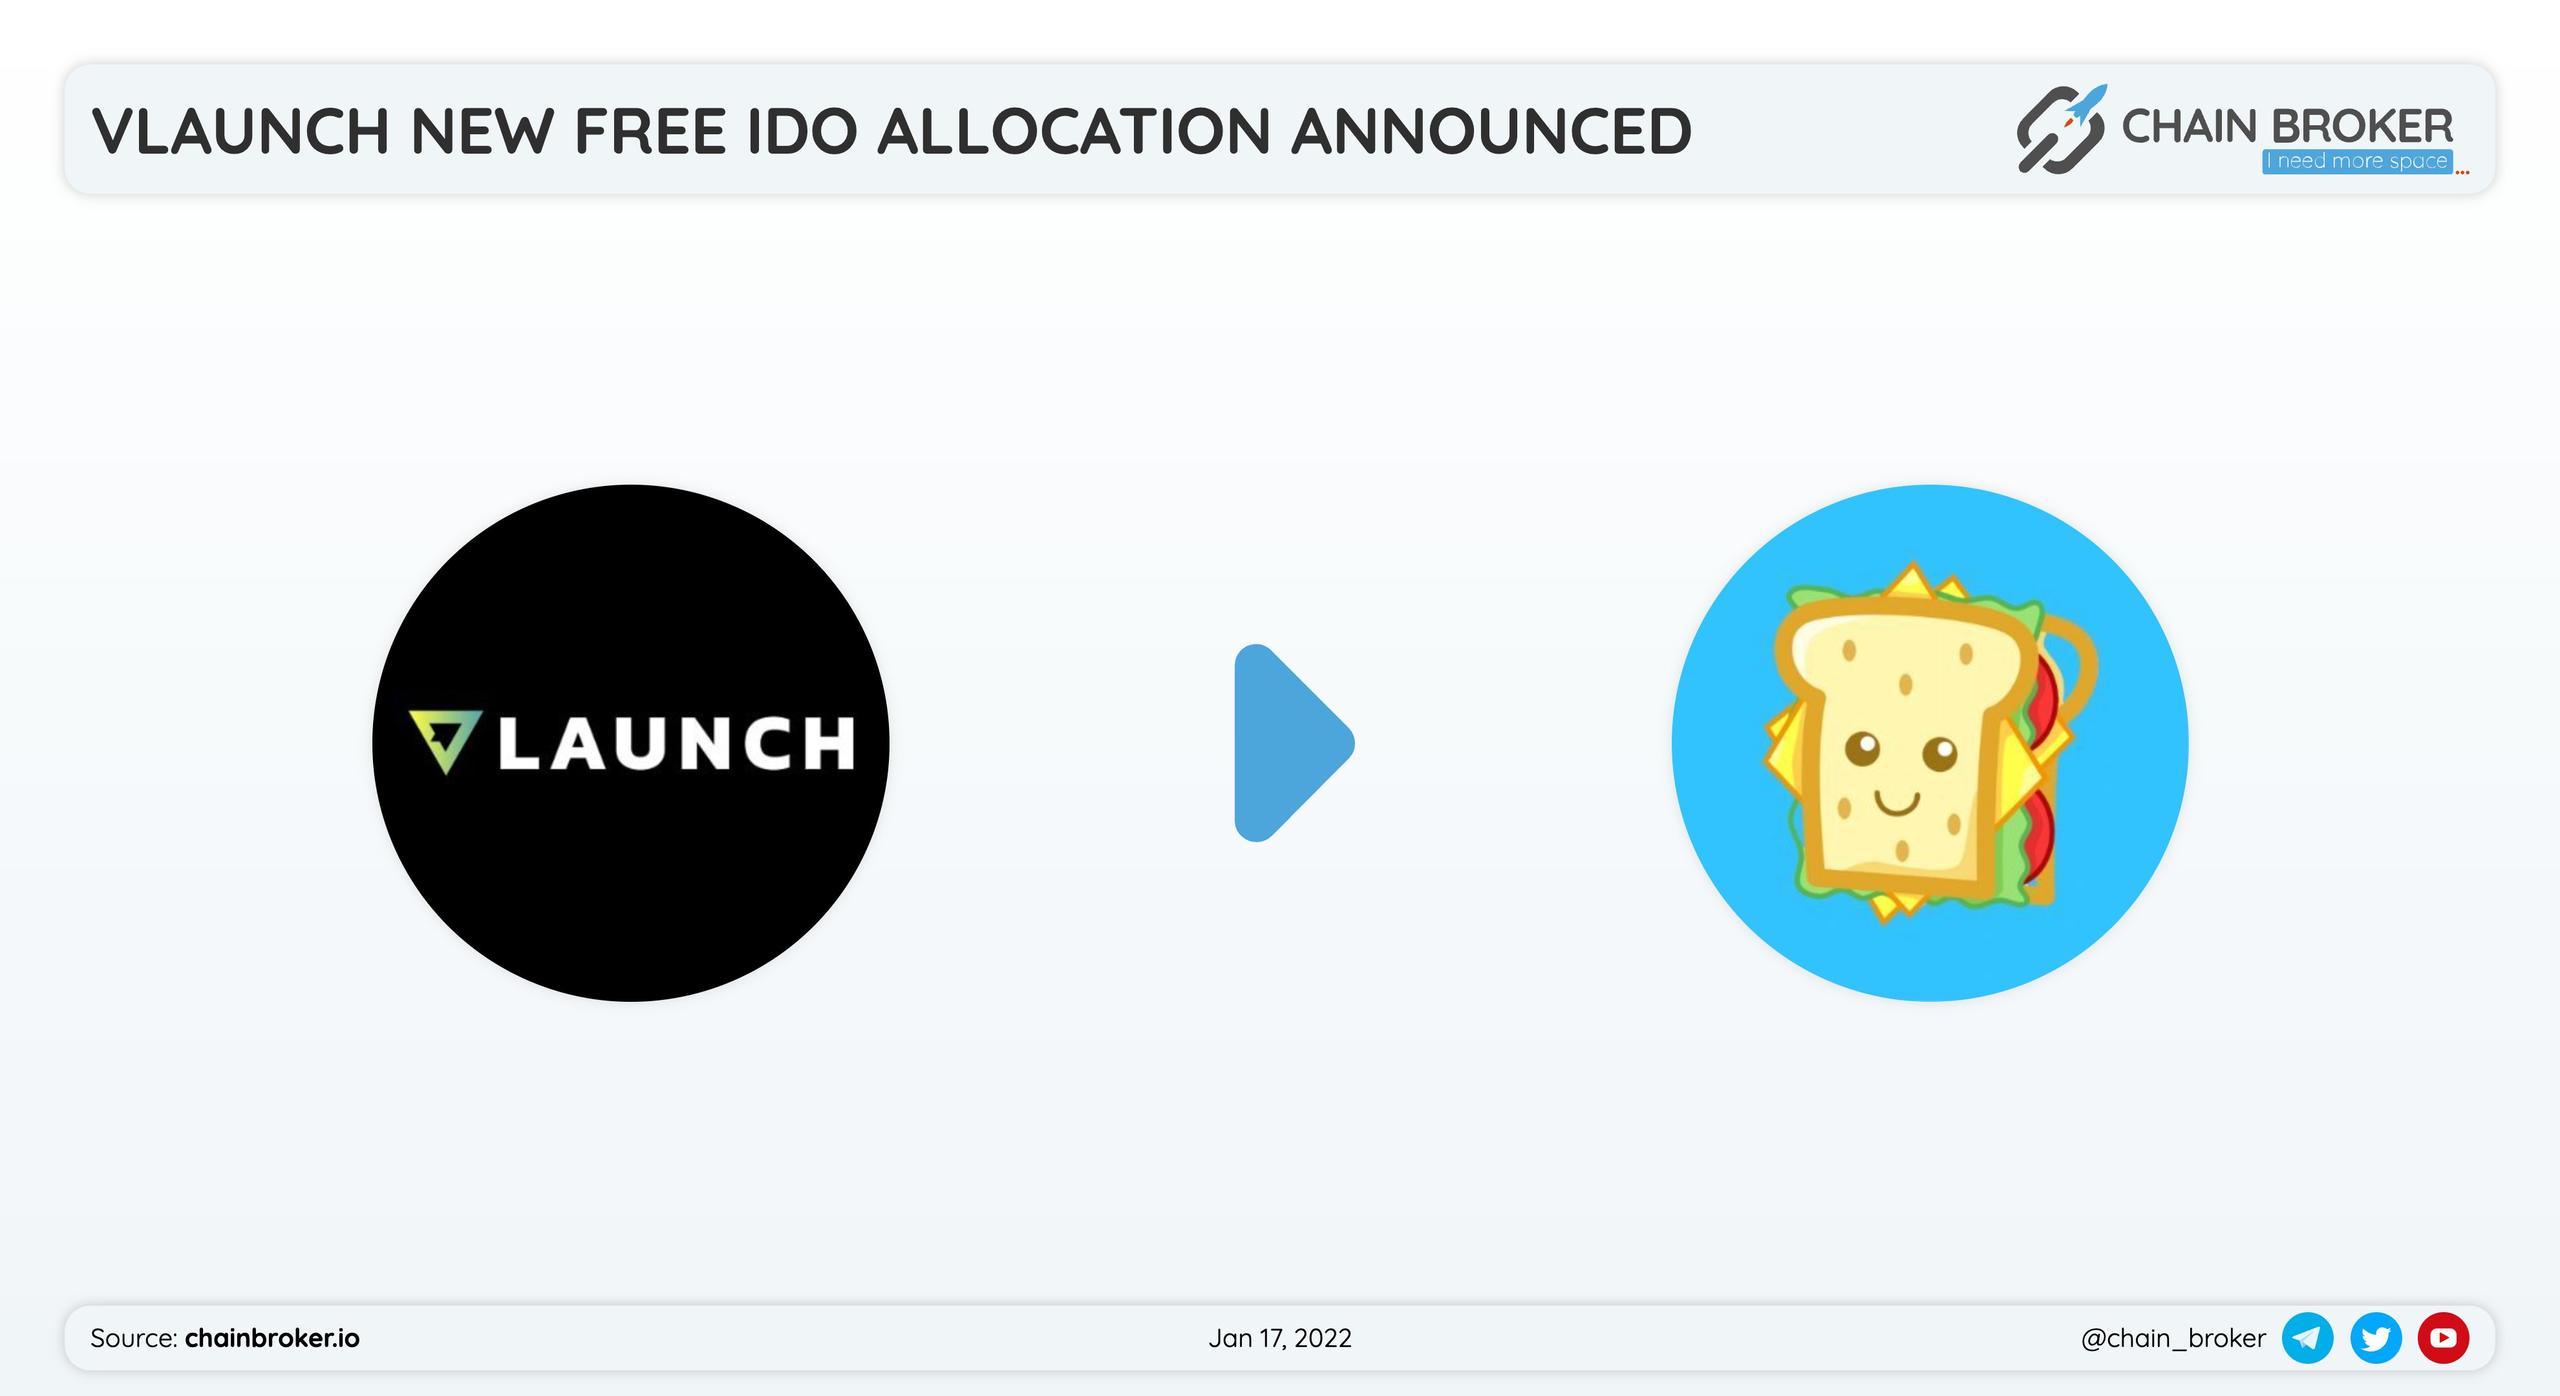 VLaunch has partnered with Sandwich Network for a token launch.